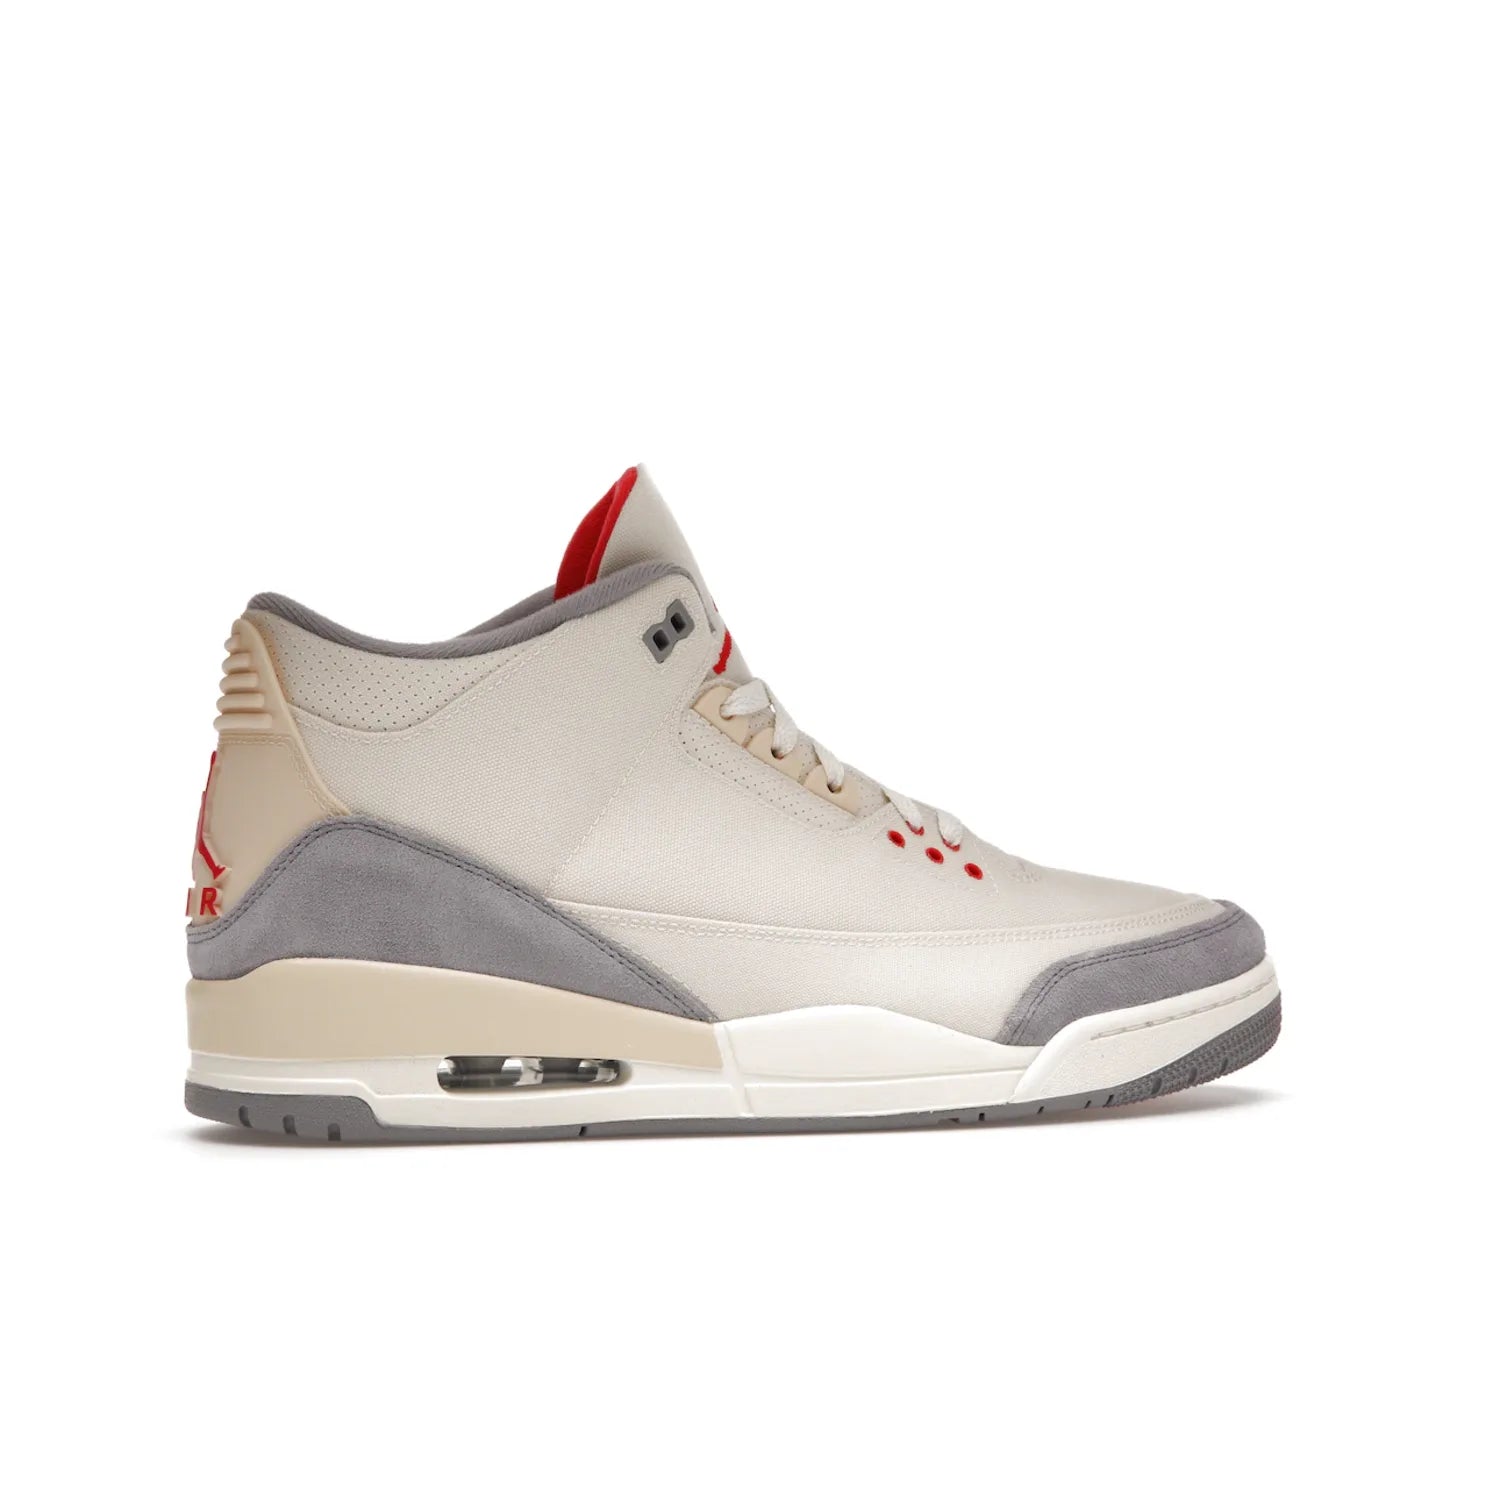 Jordan 3 Retro Muslin - Image 35 - Only at www.BallersClubKickz.com - Eye-catching Air Jordan 3 Retro Muslin in a neutral palette of grey, cream, and red. Featuring canvas upper, suede overlays and white/grey Air Max sole. Available in March 2022.